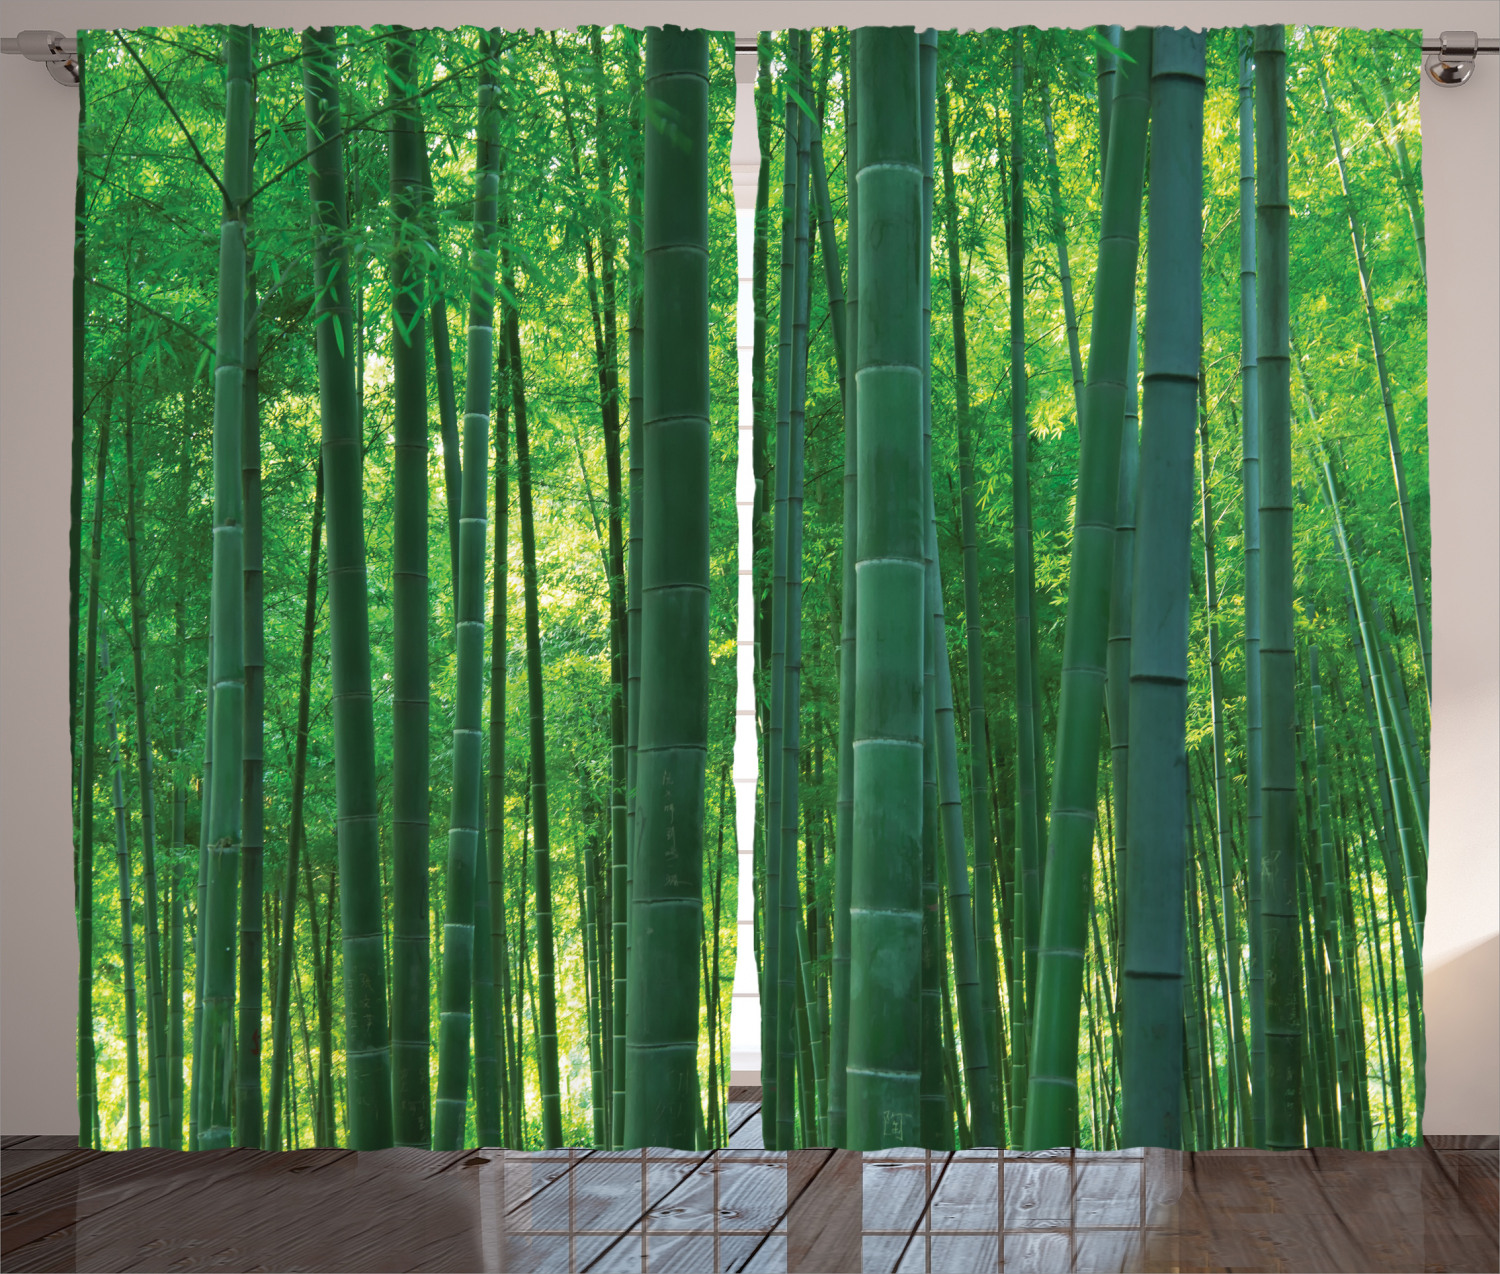 Bamboo House Decor Curtains 2 Panels Set, Asian Oriental Exotic Bamboo Trees in the Rainforest Horizontal Jungle Stalk Nature View, Living Room Bedroom Accessories, 108 X 84 Inches, by Ambesonne - image 1 of 3